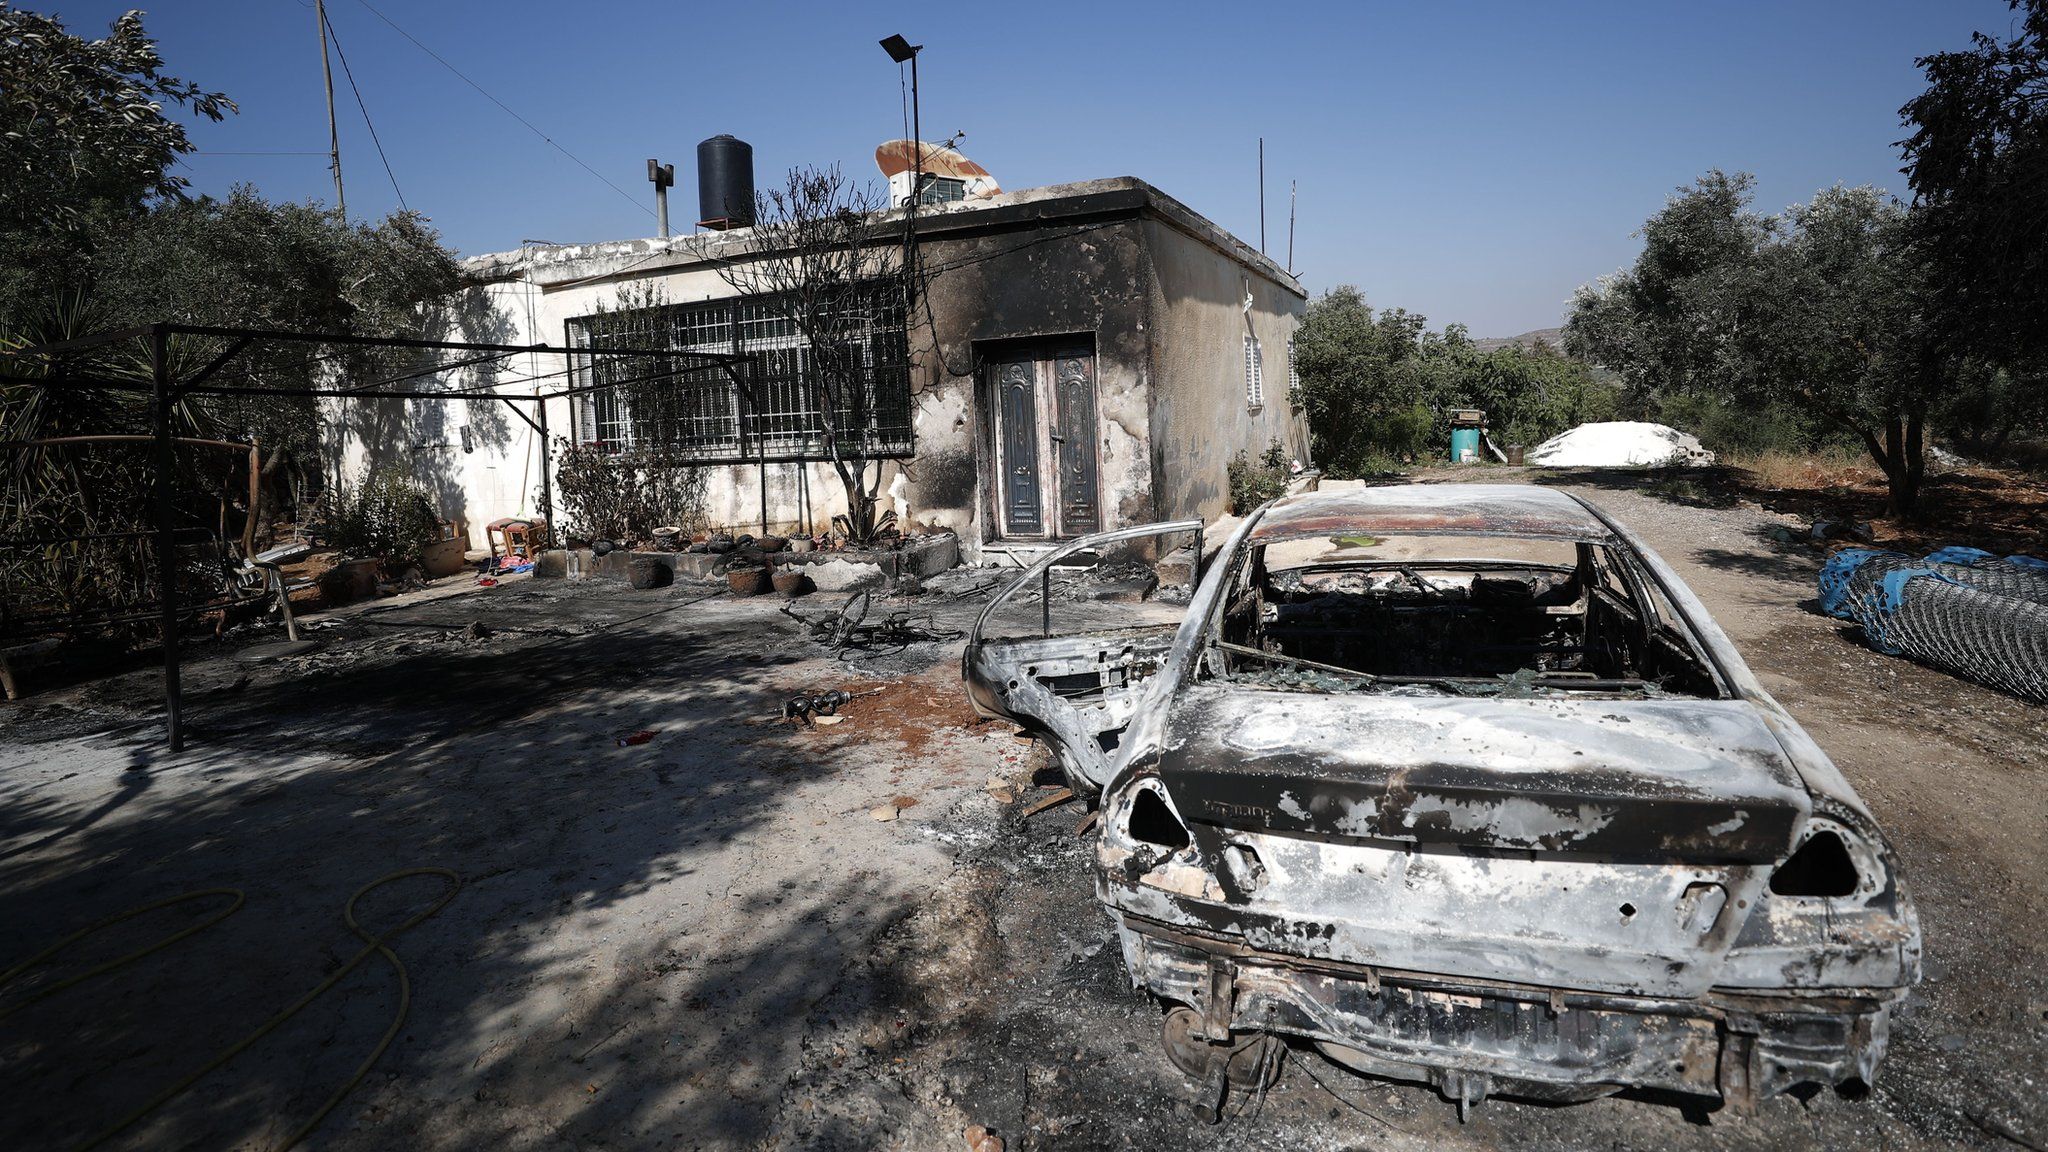 A burned out car and damaged home in the Palestinian town Turmus Aya, in the occupied West Bank, following an attack by Israeli settlers (21 June 2023)